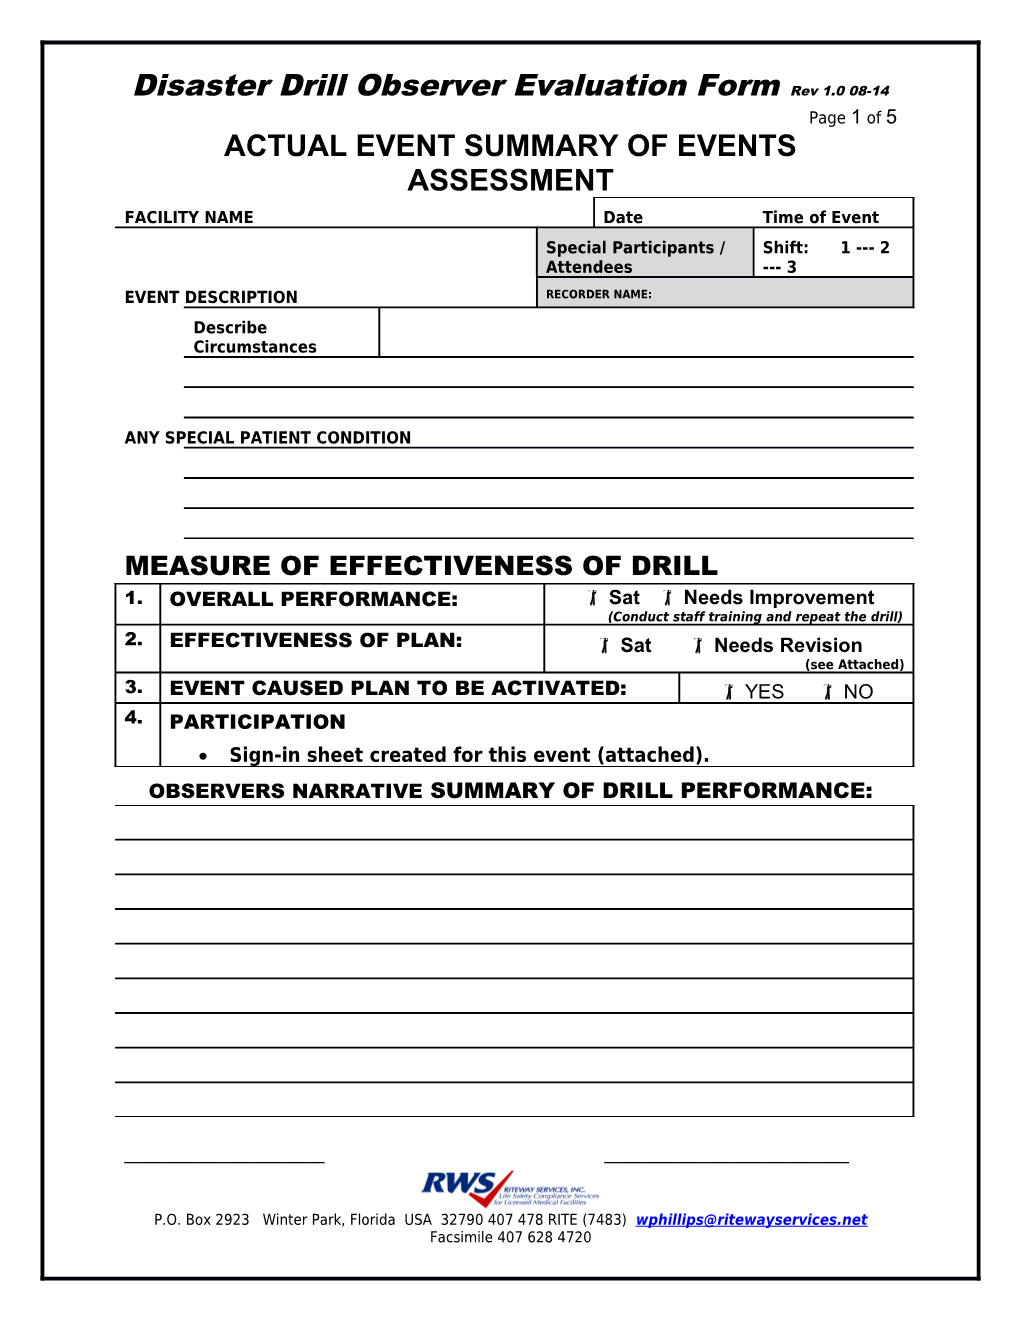 Fire Drill Instructor/ Observer Evaluation Form